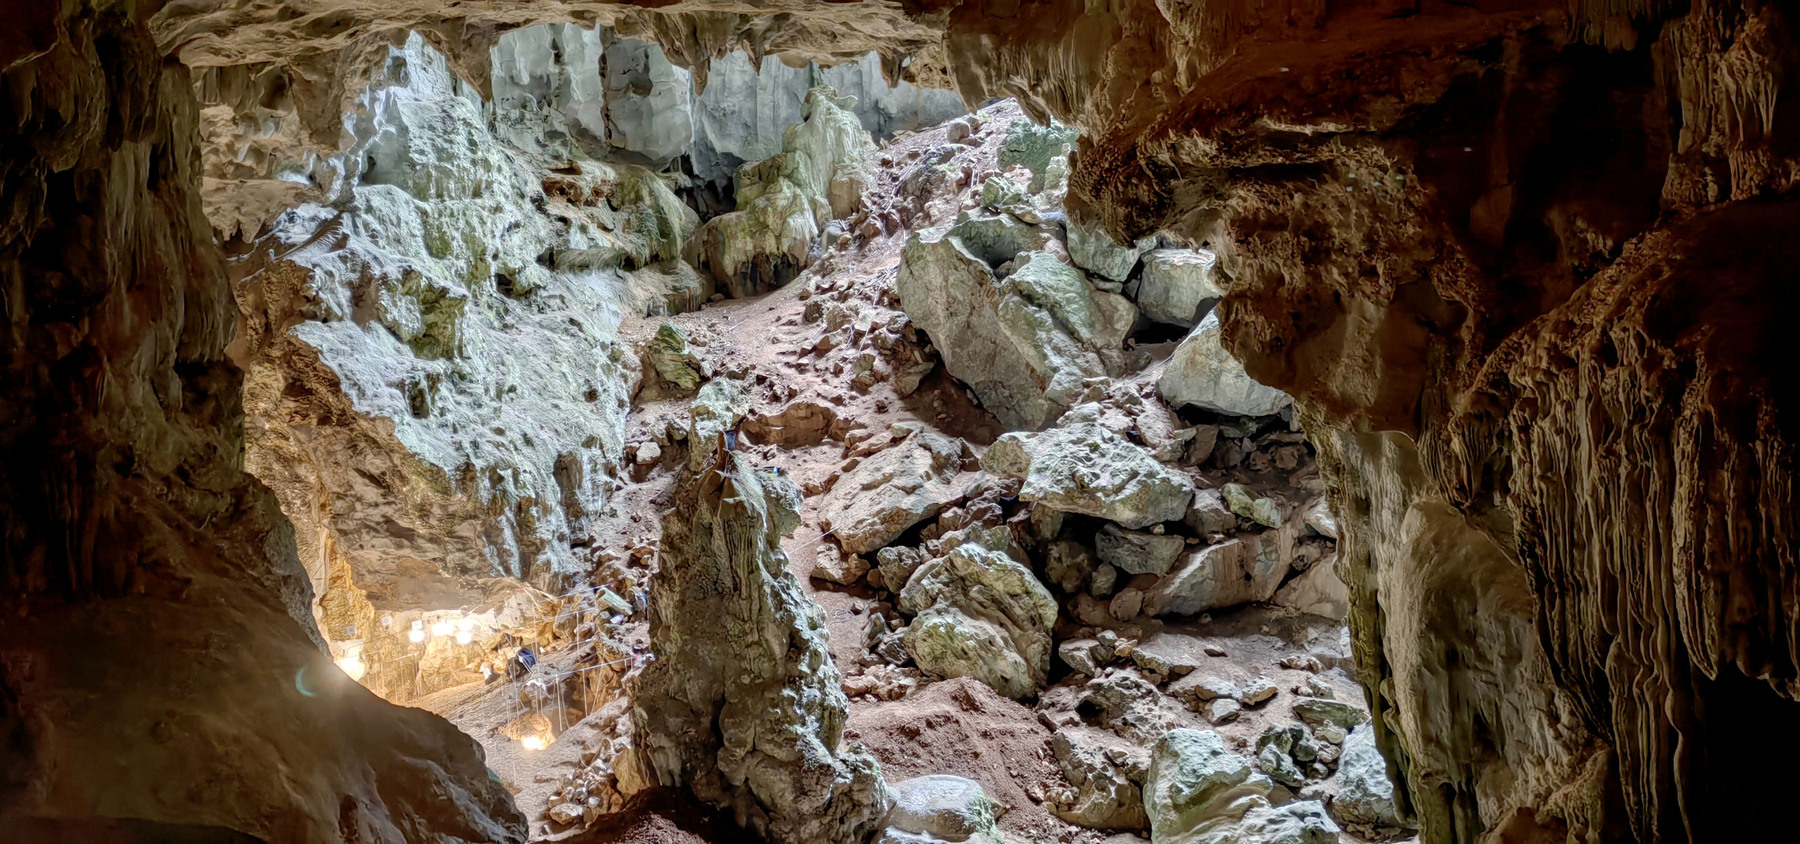 A view of the rocky interior of the cave with light filtering in from above. The team’s bright lights of excavation can be seen in the lower left side of the image.